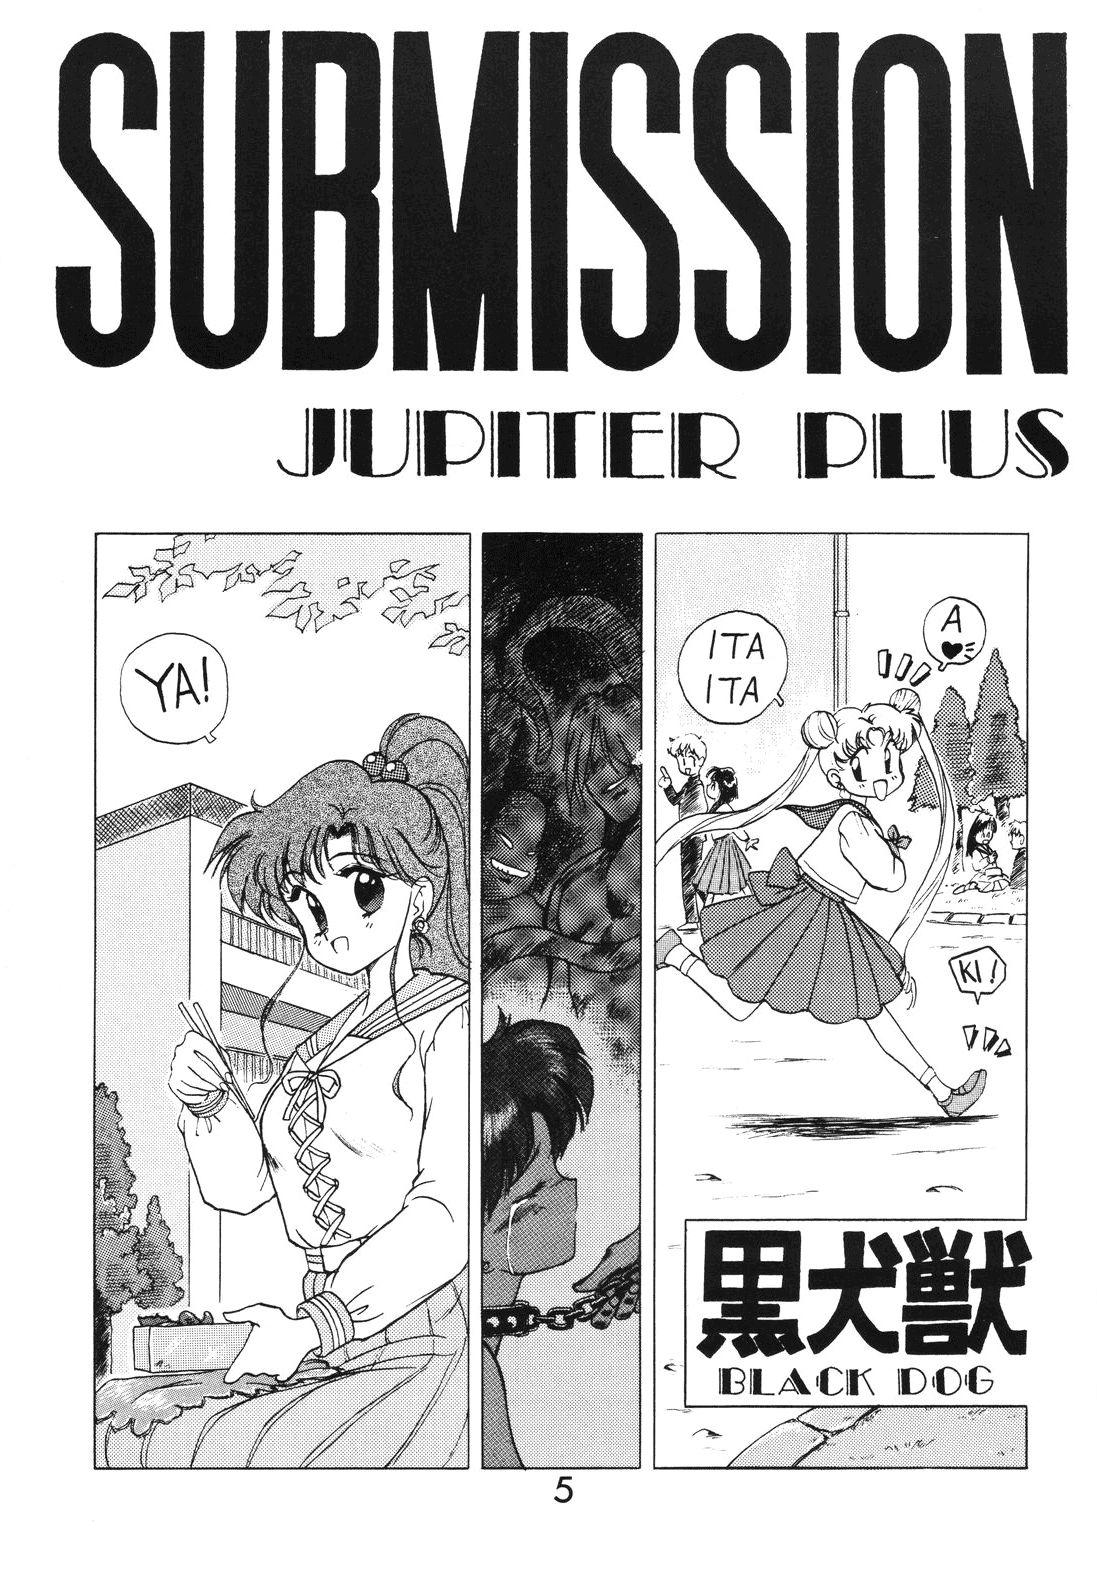 Colombia SUBMISSION JUPITER PLUS - Sailor moon Prostitute - Page 5